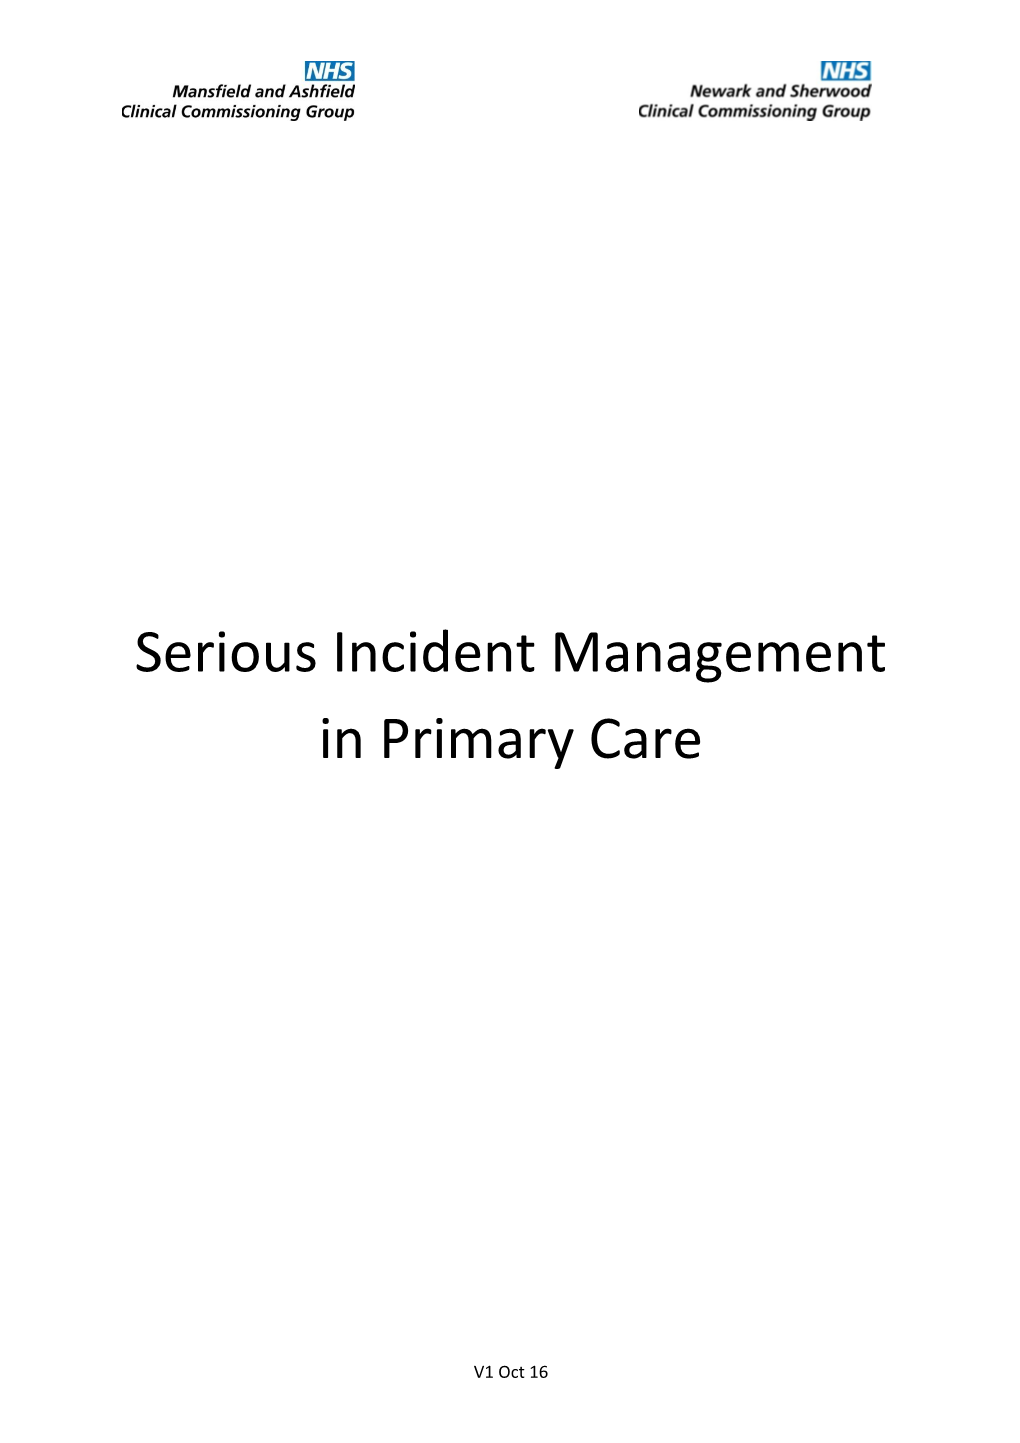 Serious Incident Management in Primary Care